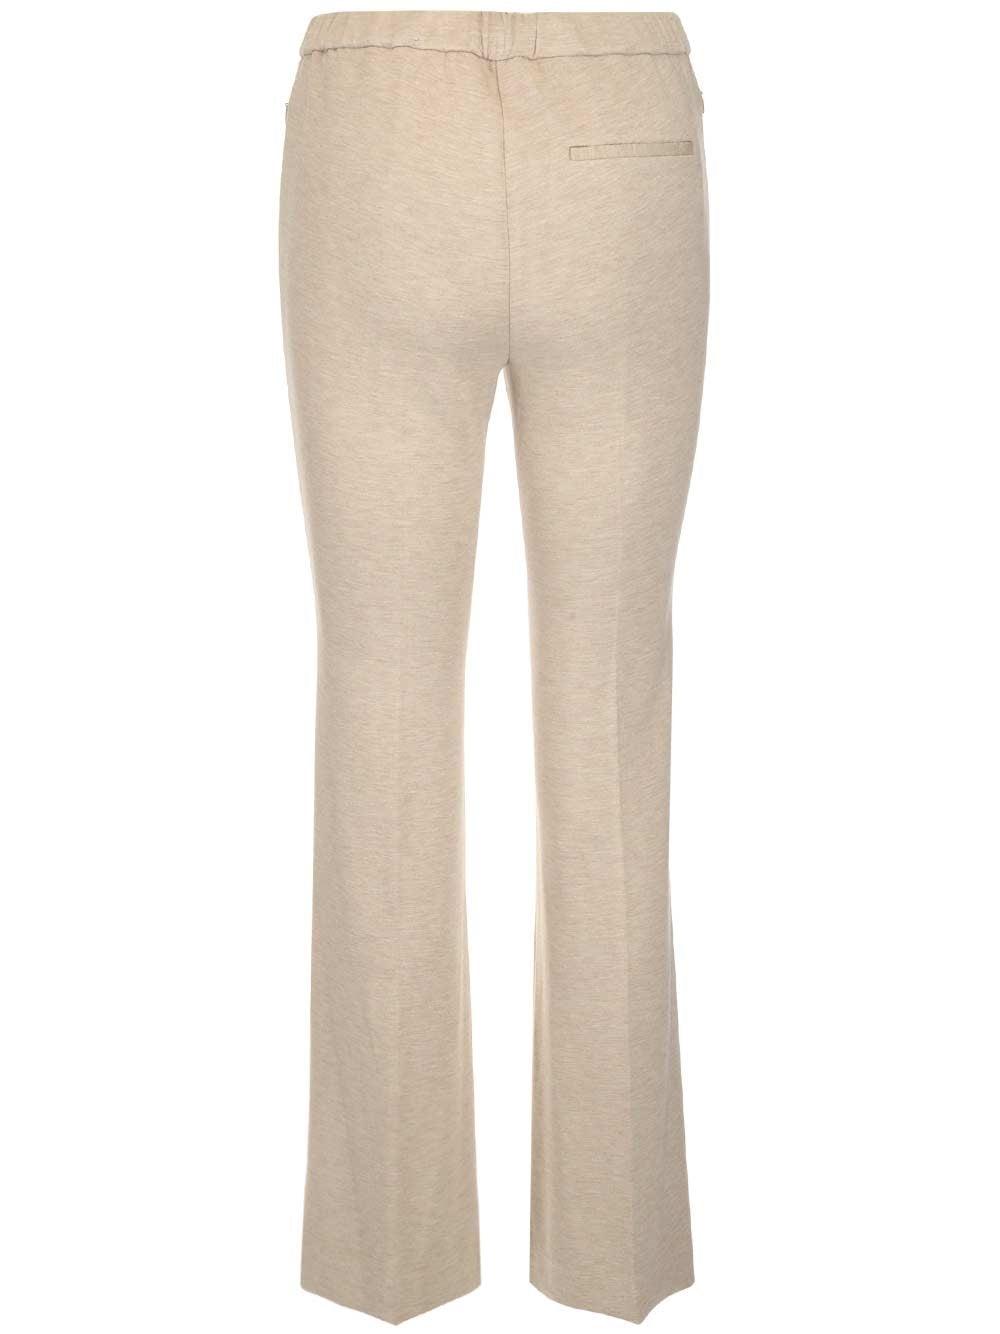 Theory Slit Demitria Double-knit Jersey Pants in Natural